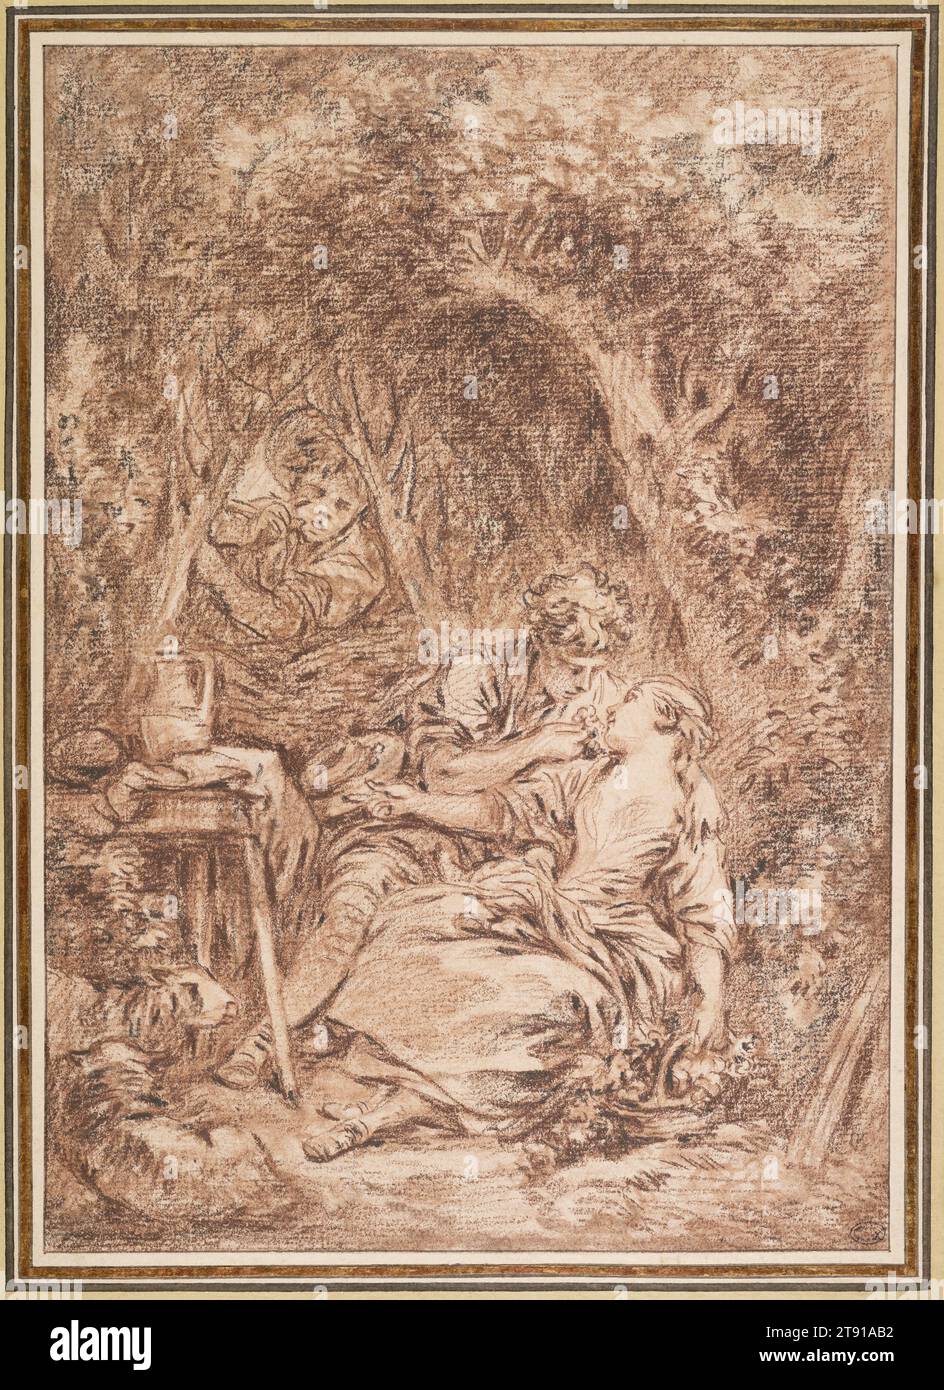 Lovers Surprised (Annette et Lubin), early 1760s, François Boucher, French, 1703–1770, 10 3/4 x 7 7/16 in. (27.31 x 18.89 cm) (image)13 1/4 x 10 5/8 in. (33.66 x 26.99 cm) (mount)18 1/2 × 14 1/8 × 7/8 in. (46.99 × 35.88 × 2.22 cm) (outer frame), Brown and black chalk, with touches of brown wash on paper, France, 18th century, In François Boucher’s world, gods and goddesses, shepherds and shepherdesses, voluptuous nymphs, enchanting peasants, dewy adolescents, and adorable winged infants cannot help but fall in love. Stock Photo